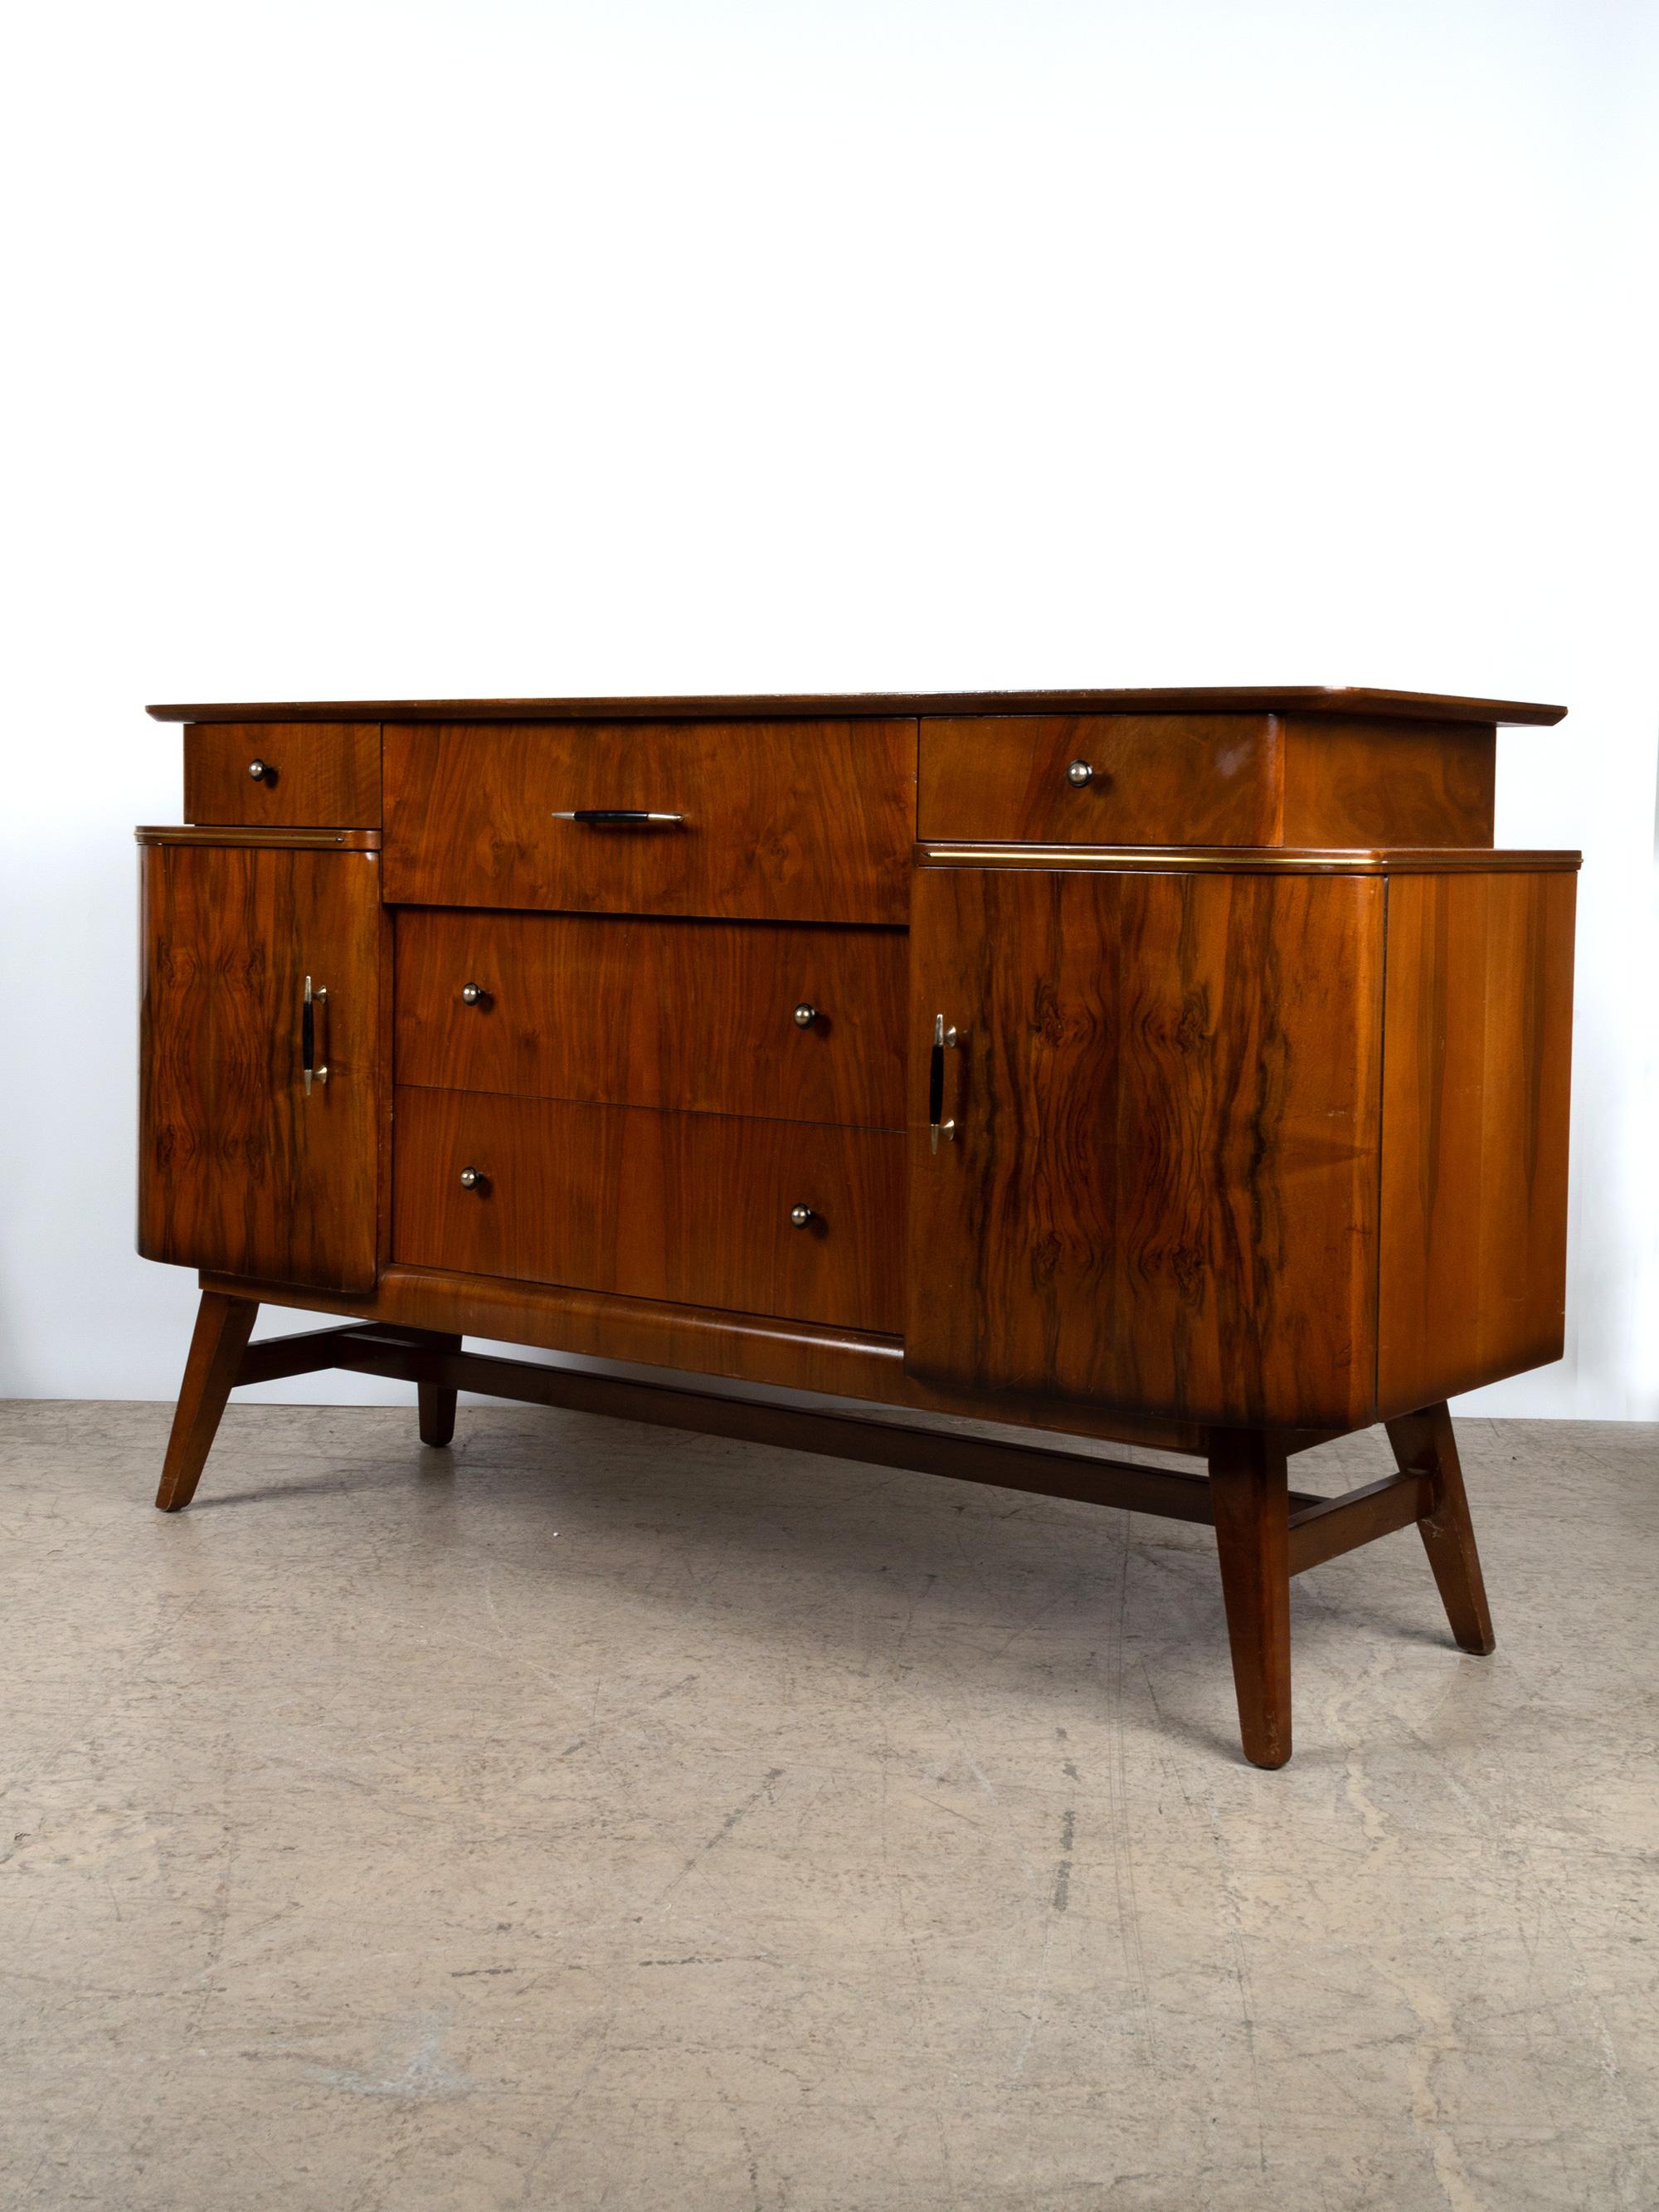 Figured walnut midcentury credenza sideboard by British manufacturer Beautility England, circa 1960. An elegant sculptural piece in the Art Deco manner.
The sideboard is constructed in mahogany and finished in beautiful book matched burr (burl)